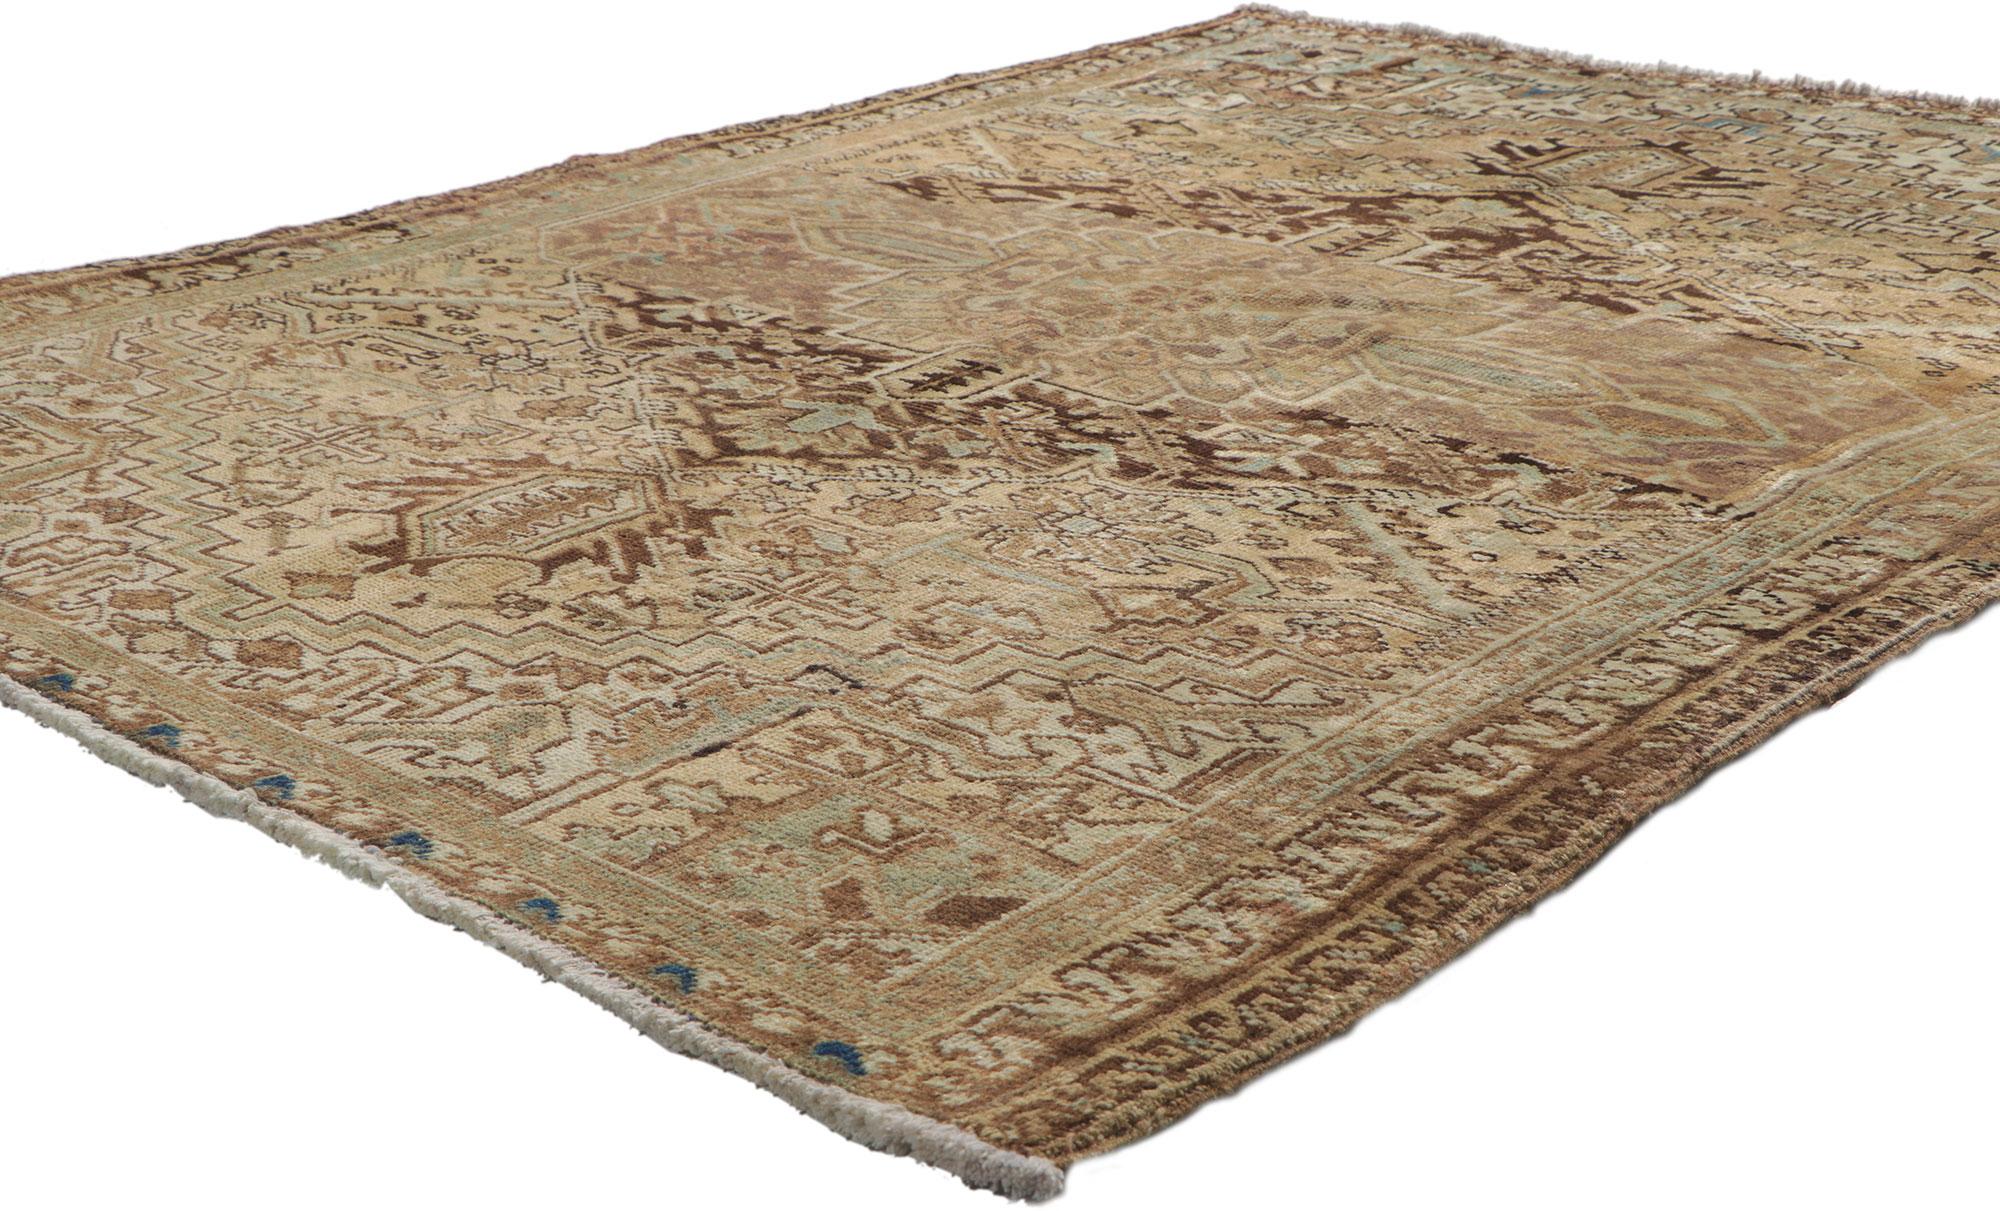 61149 vintage Persian Heriz rug, 04'09 x 06'00.
Perfect for a small space, reading nook, grand foyer, designer entry, study, studio, den, walk-in closet, stair landing, alcove, mudroom, master bathroom, entryway, bedroom, private library, private